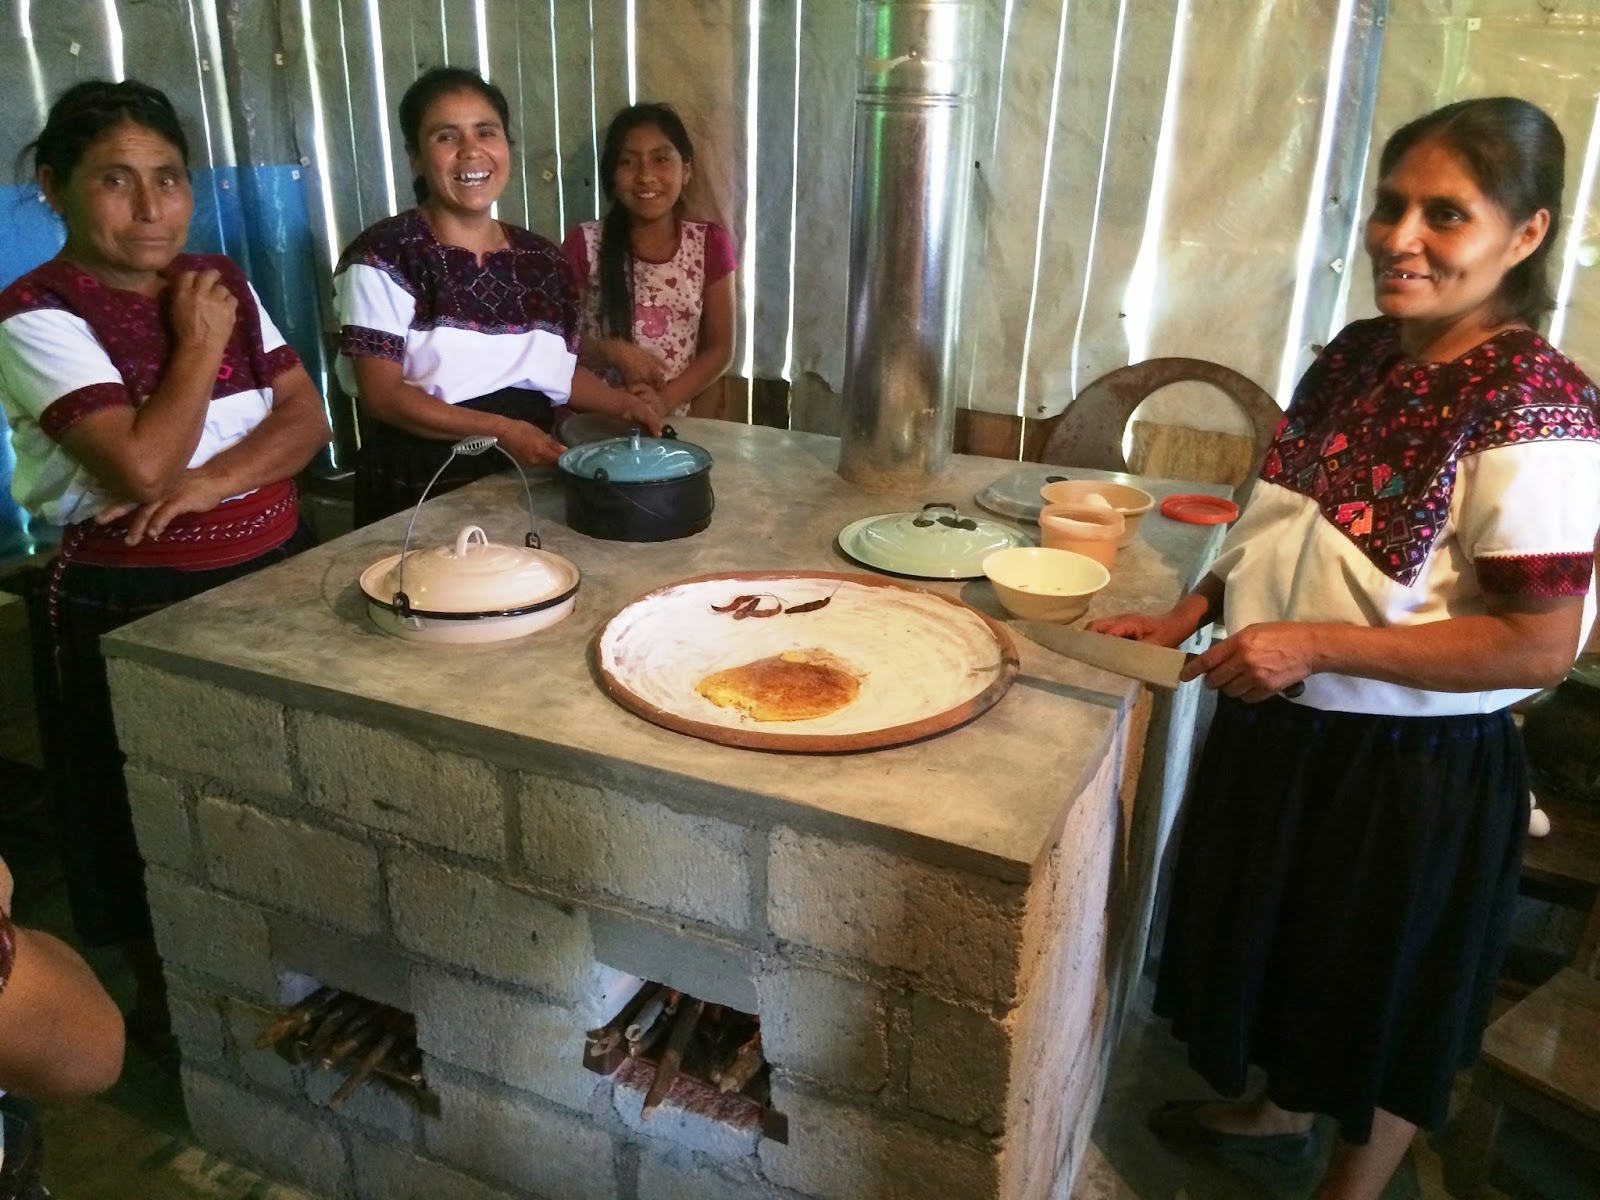 The International Foundation Announces a $15,000 Grant to Support our Cook-stove Program